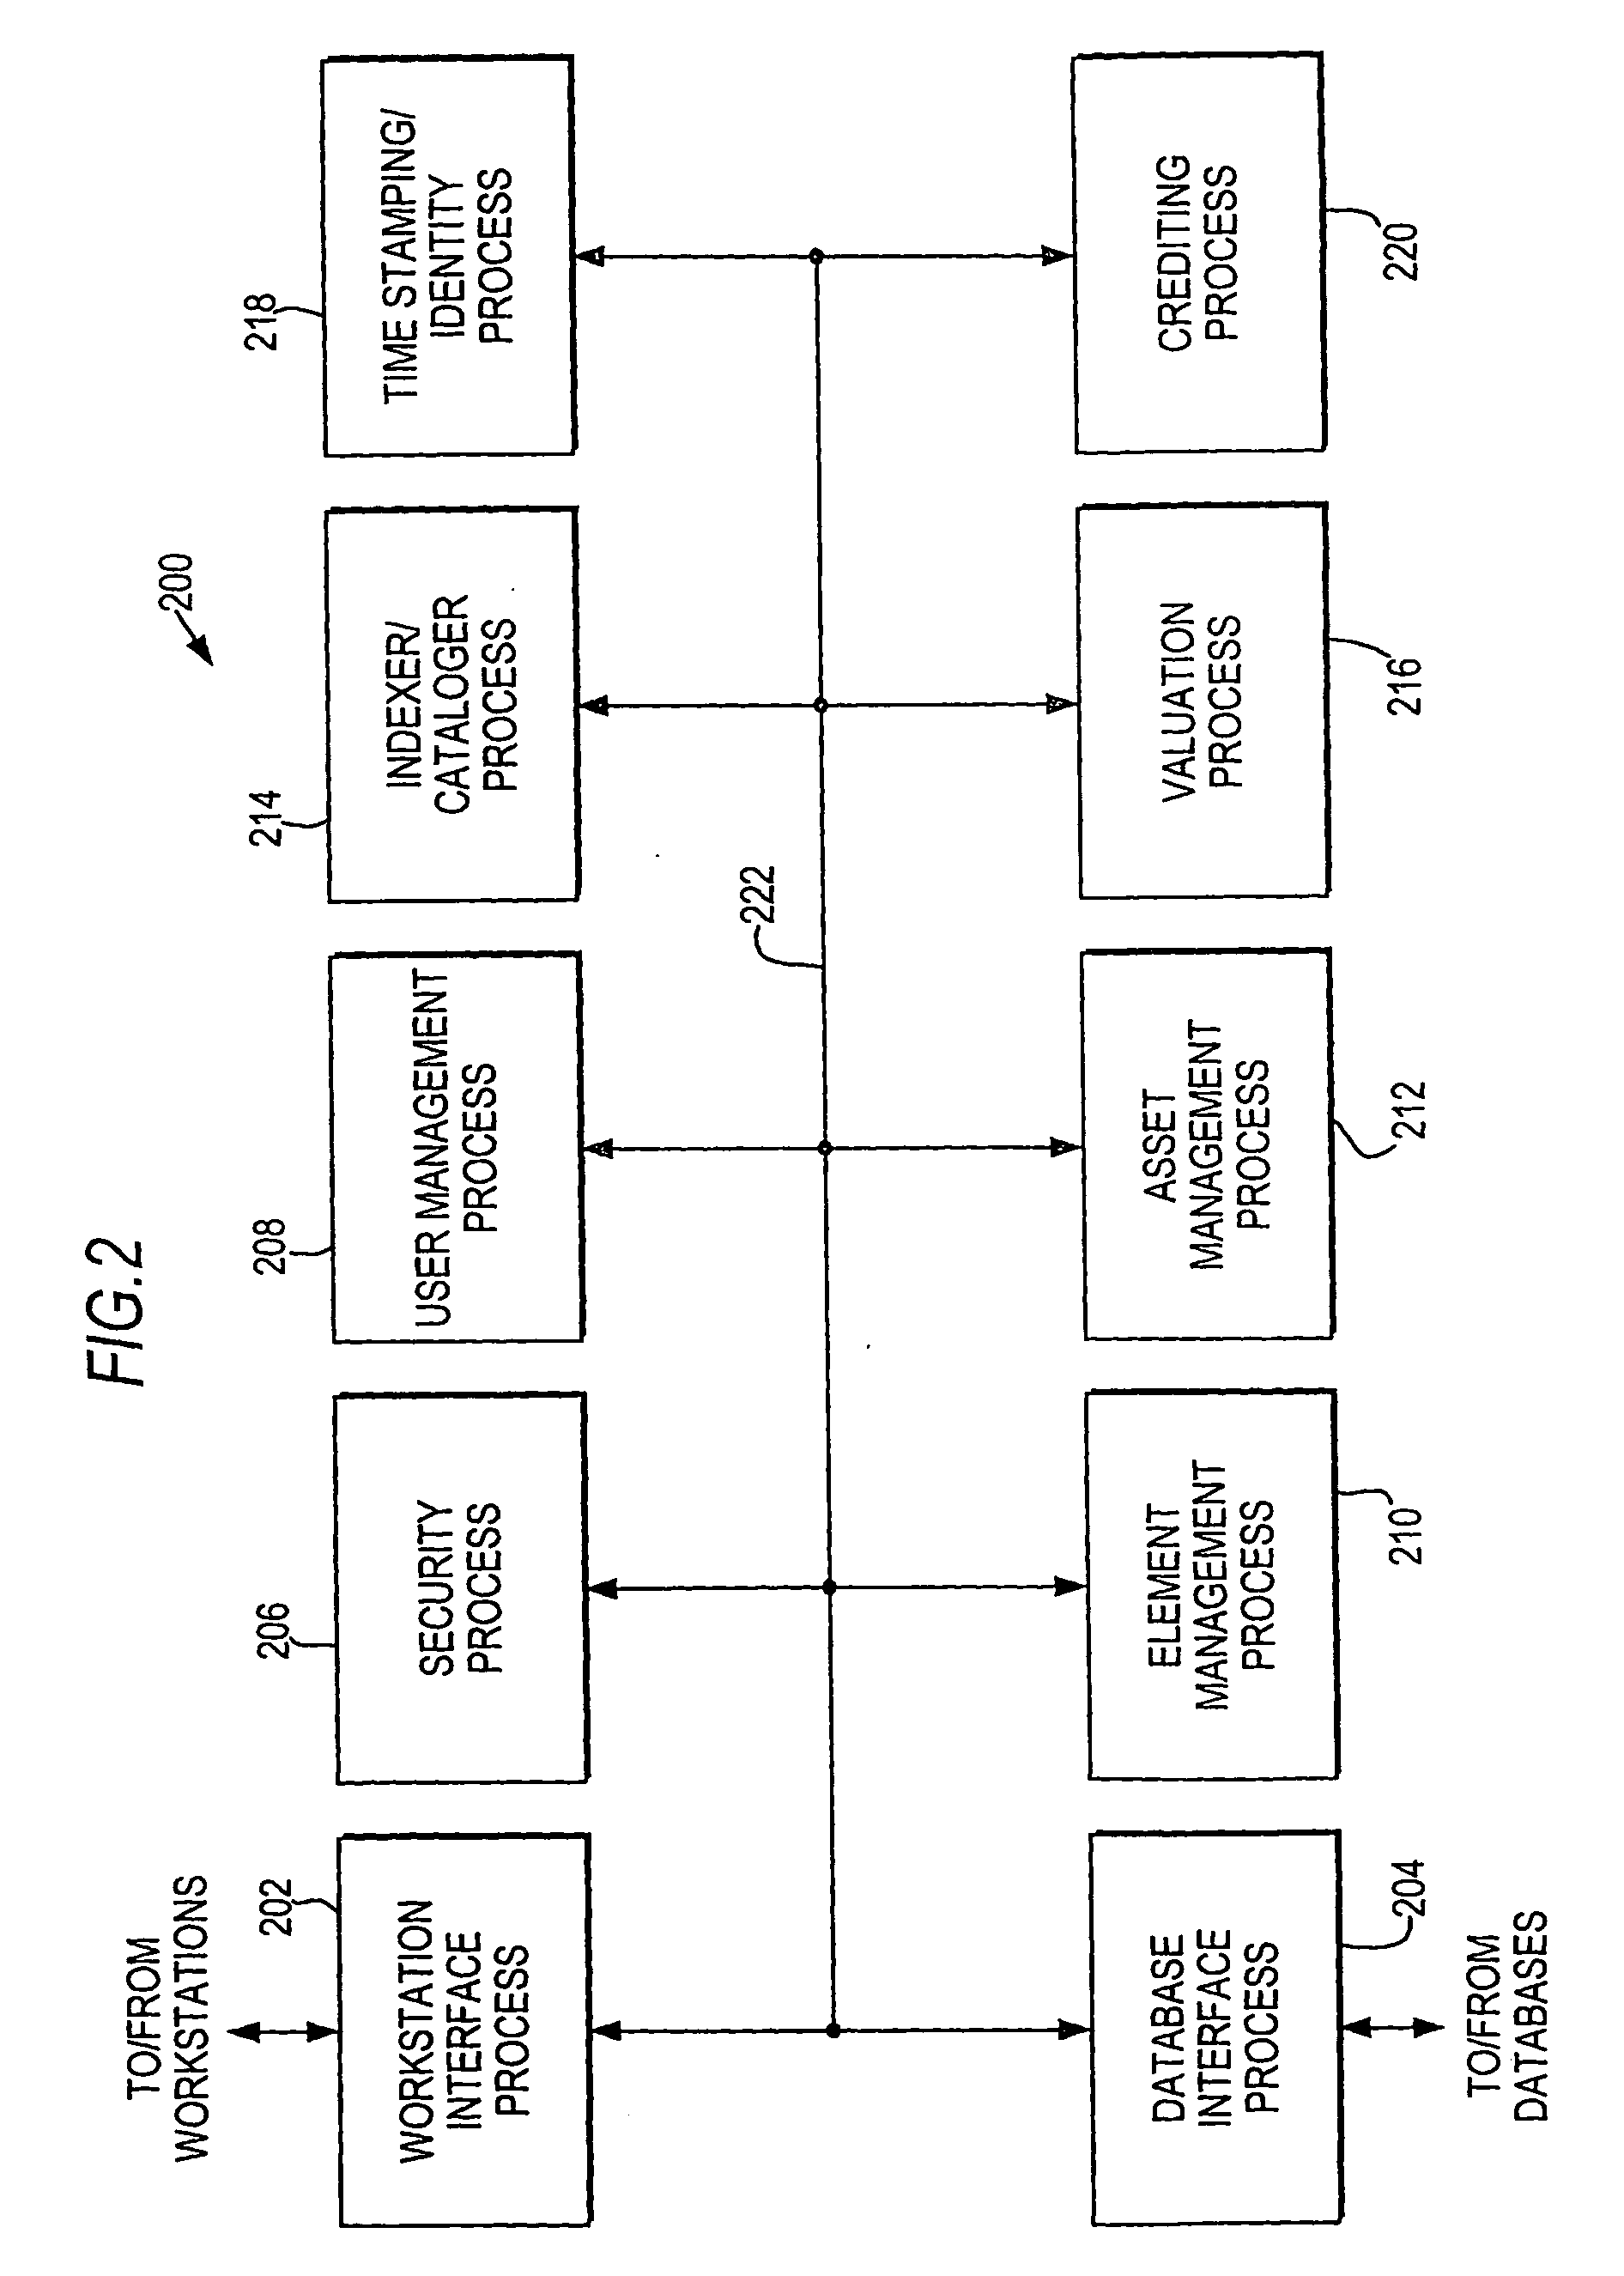 Systems and methods for managing intellectual property